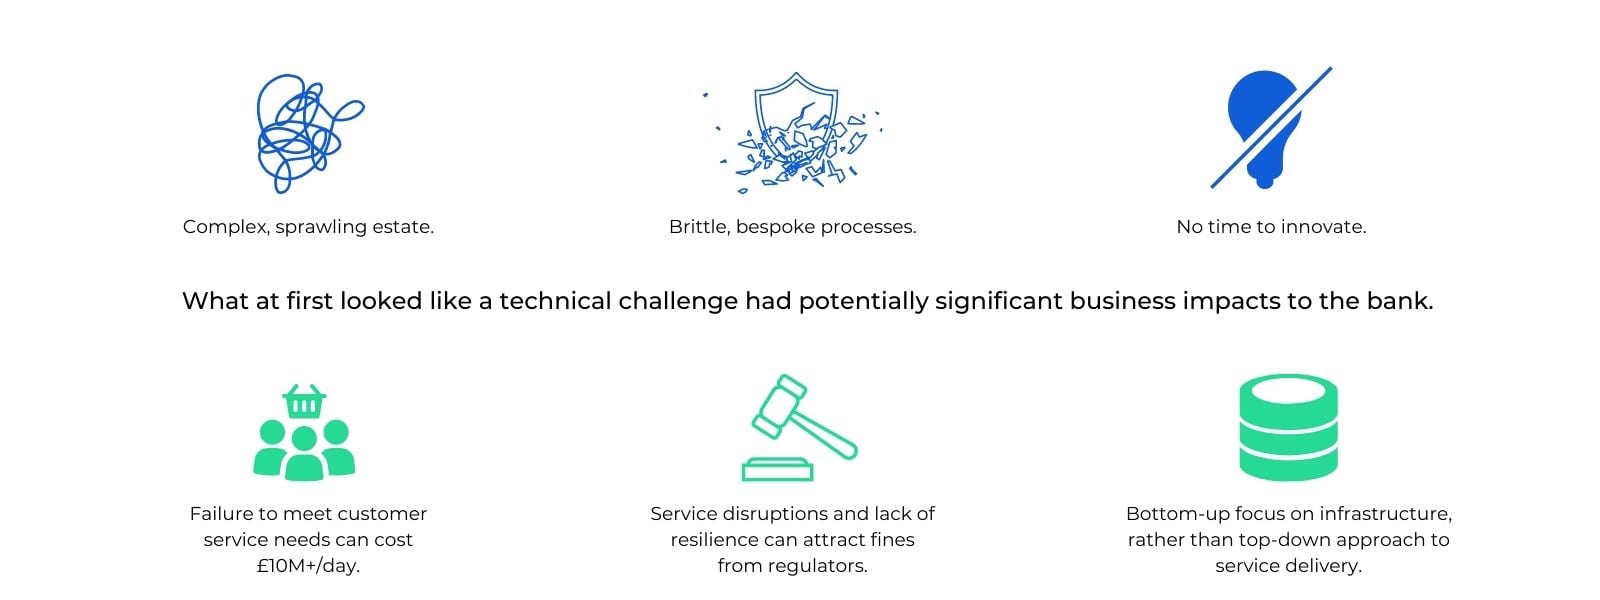 Business challenges from technical challenges